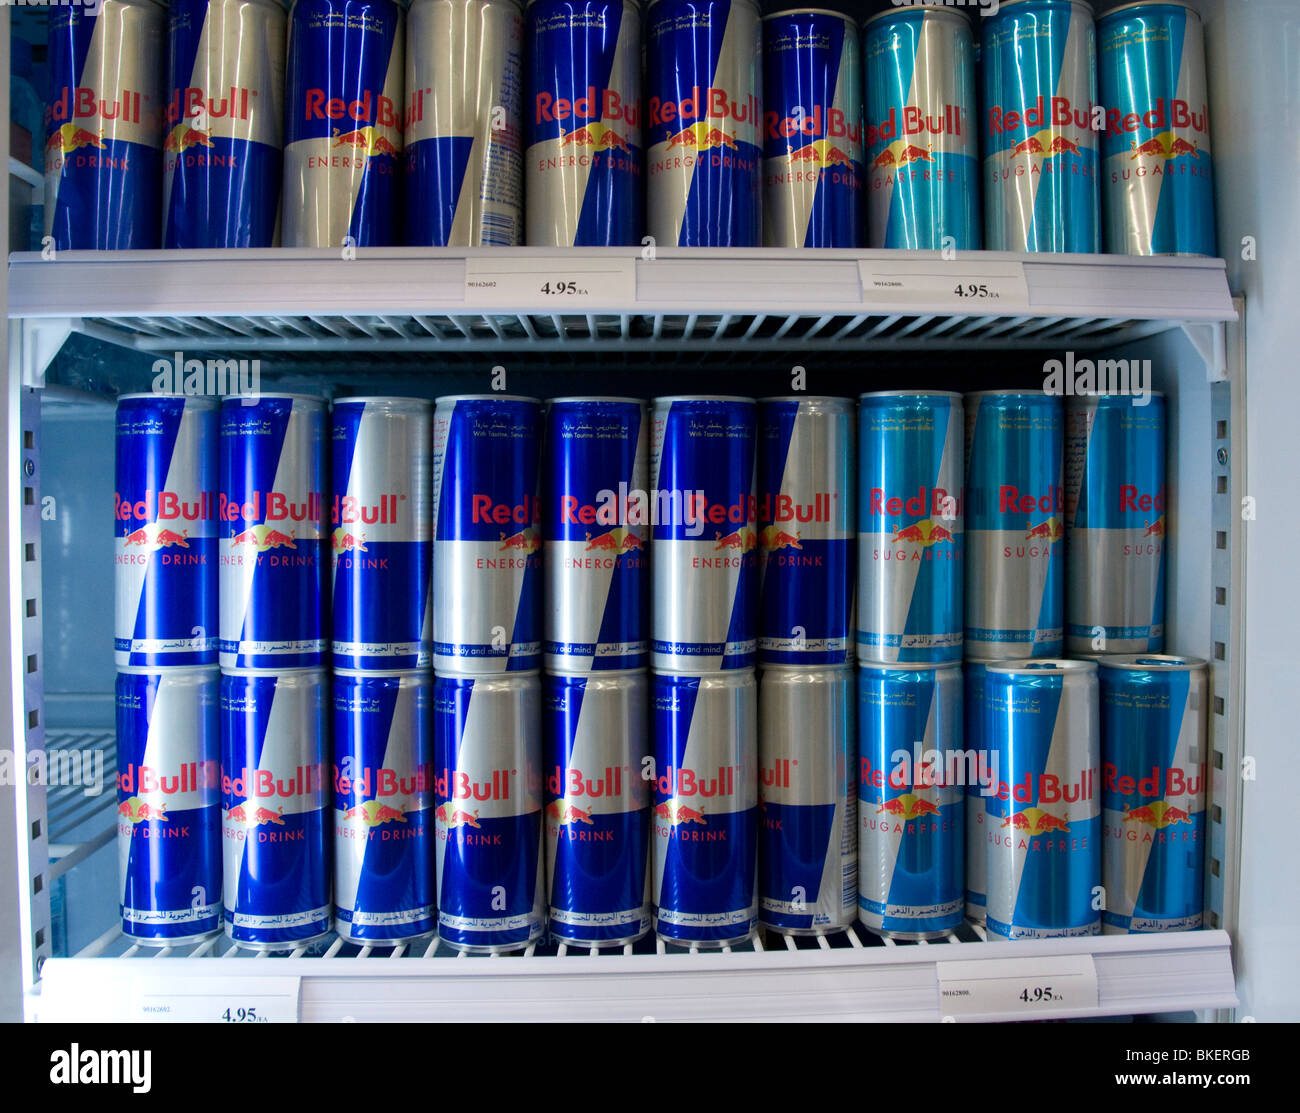 Red Bull cans in a fridge Stock Photo - Alamy